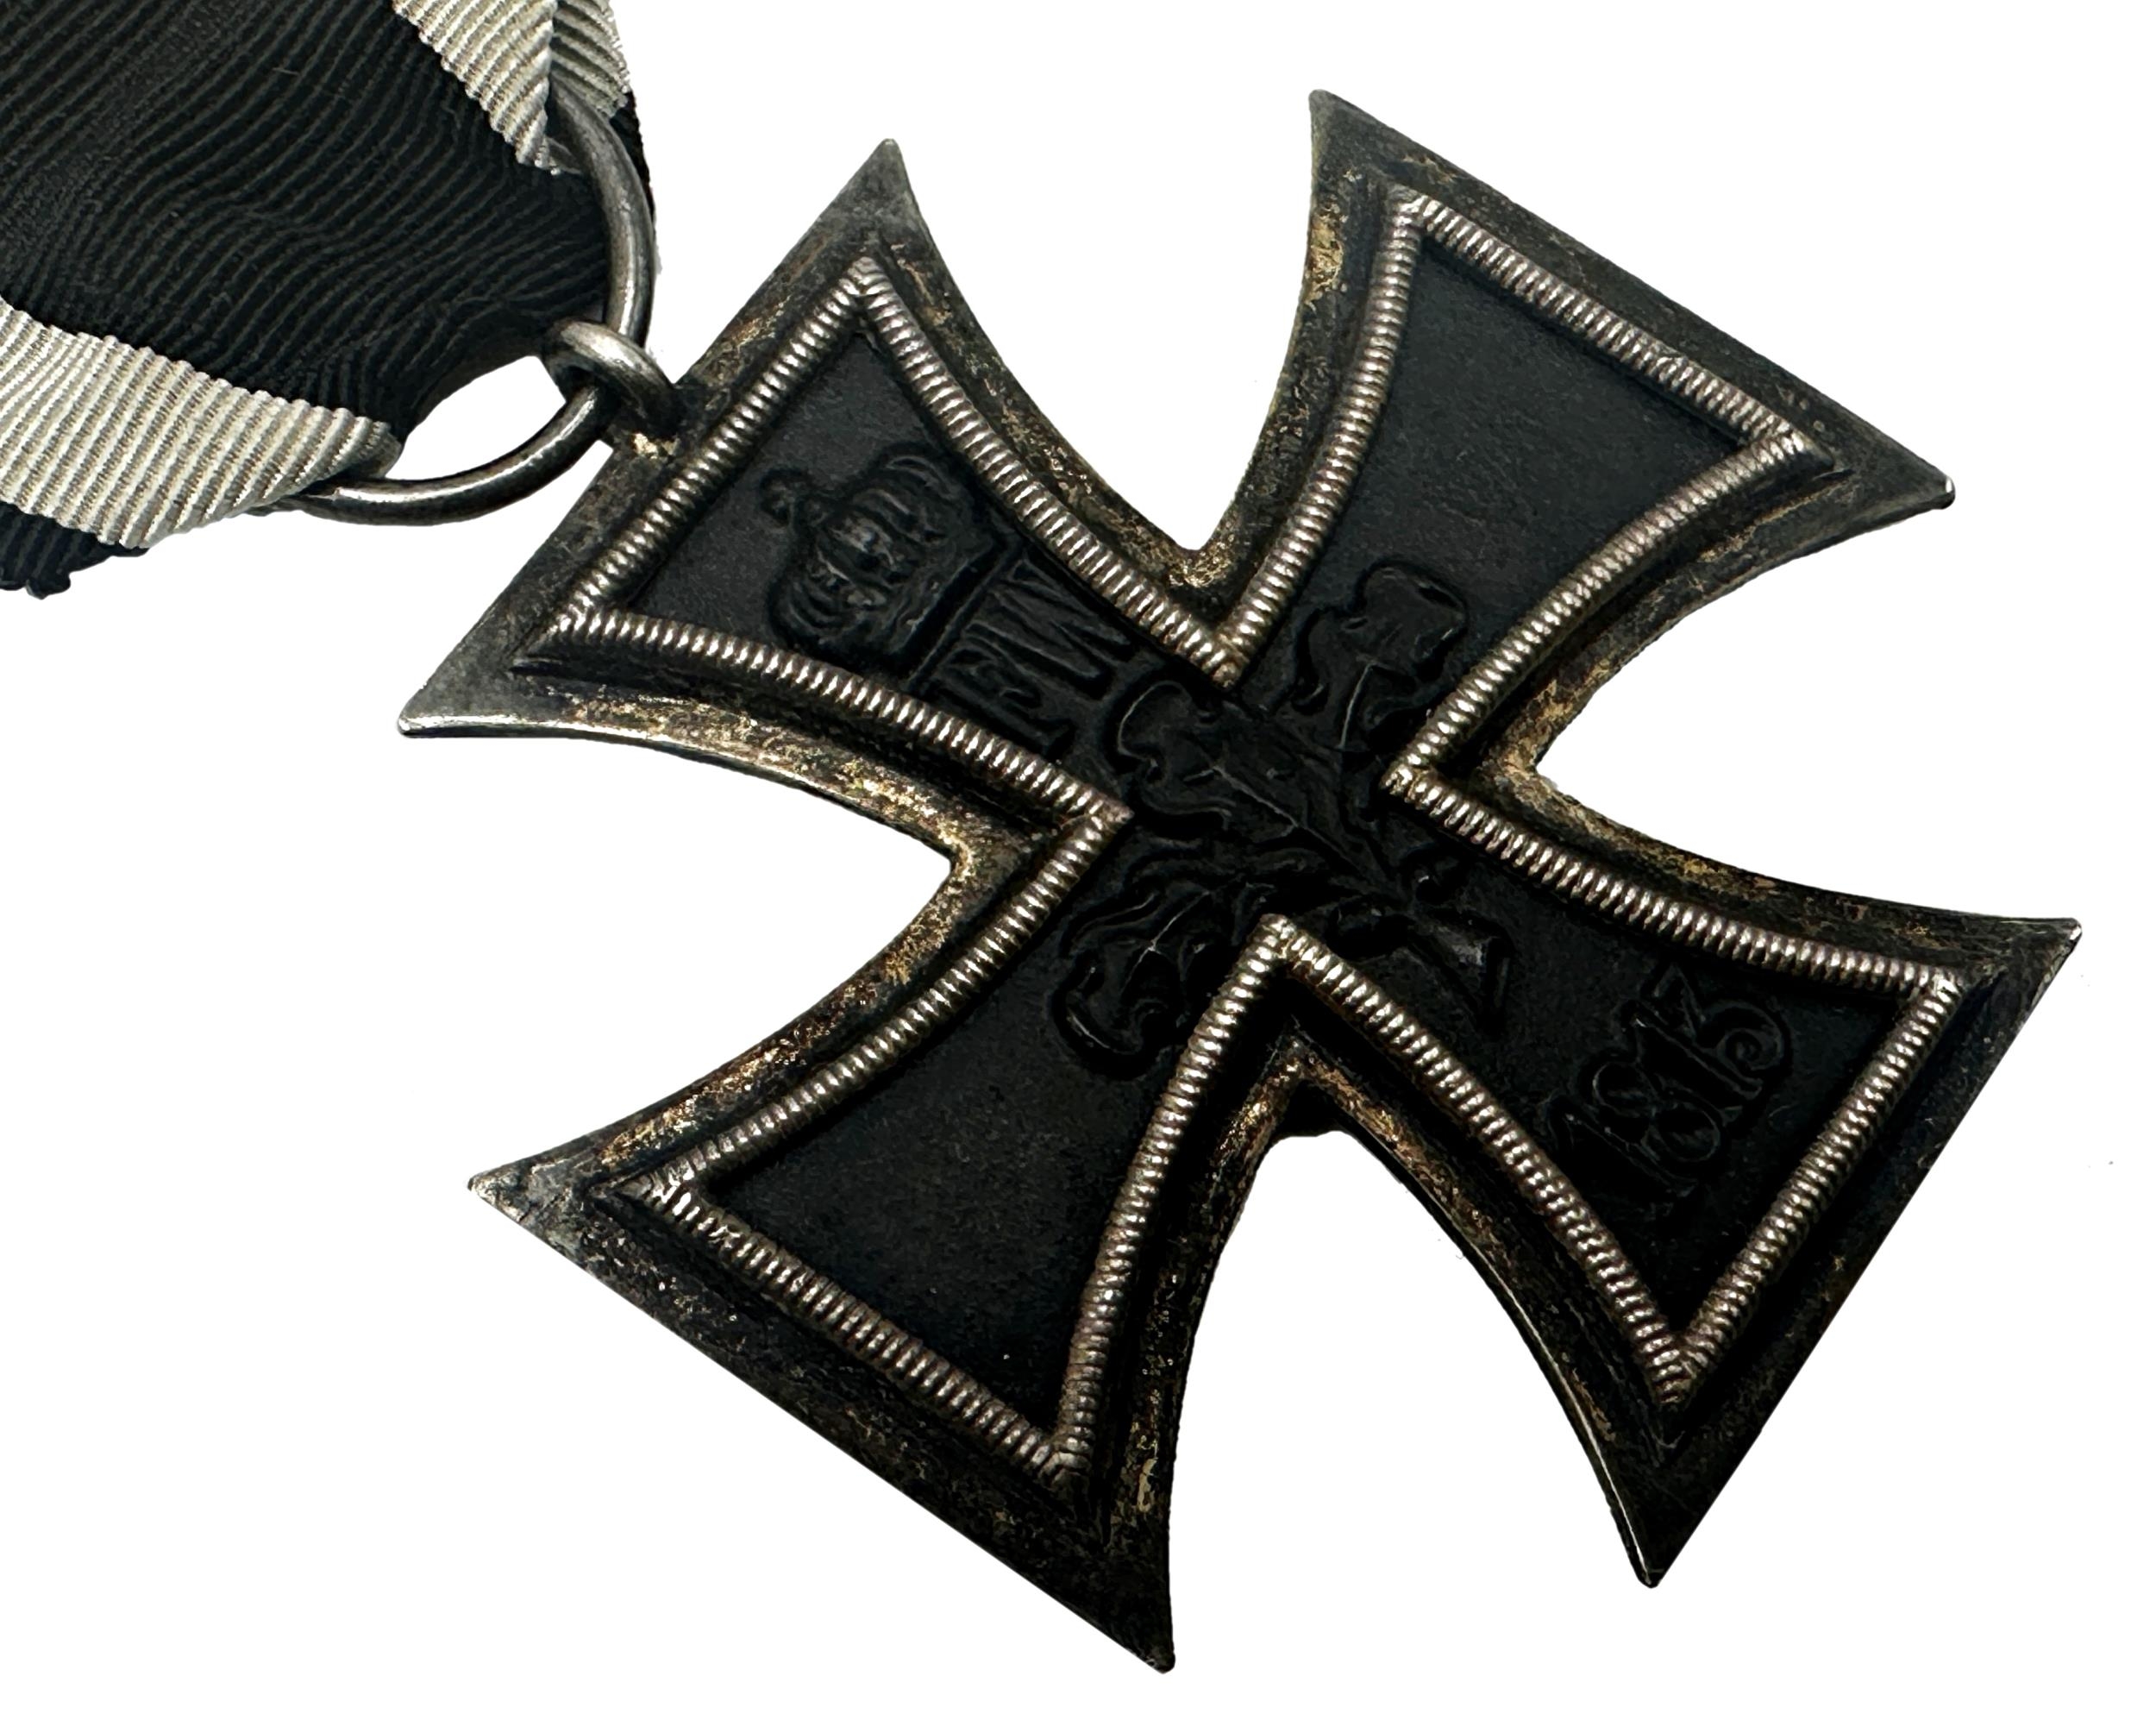 German WWI iron cross medal on ribbon - Image 2 of 3